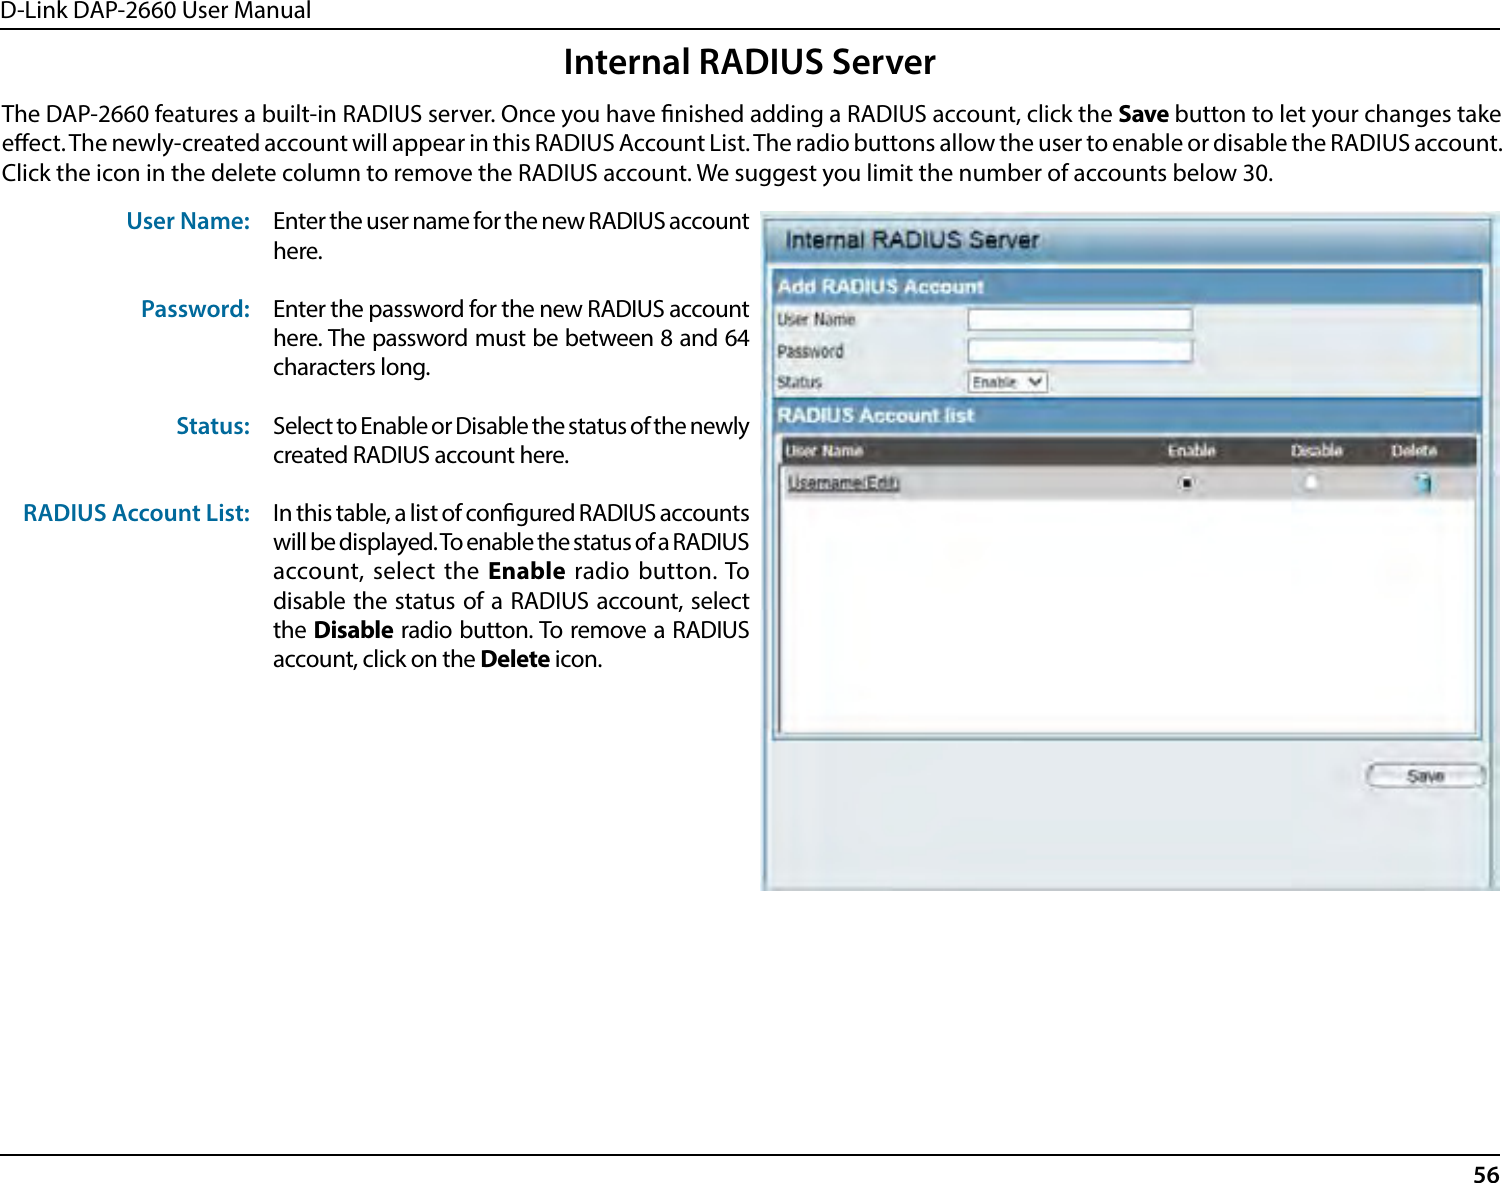 D-Link DAP-2660 User Manual56Internal RADIUS ServerThe DAP-2660 features a built-in RADIUS server. Once you have nished adding a RADIUS account, click the Save button to let your changes take eect. The newly-created account will appear in this RADIUS Account List. The radio buttons allow the user to enable or disable the RADIUS account. Click the icon in the delete column to remove the RADIUS account. We suggest you limit the number of accounts below 30.User Name:Password:Status:RADIUS Account List:Enter the user name for the new RADIUS account here.Enter the password for the new RADIUS account here. The password must be between 8 and 64 characters long.Select to Enable or Disable the status of the newly created RADIUS account here.In this table, a list of congured RADIUS accounts will be displayed. To enable the status of a RADIUS account, select the Enable radio button. To disable the status of a RADIUS account, select the Disable radio button. To remove a RADIUS account, click on the Delete icon.